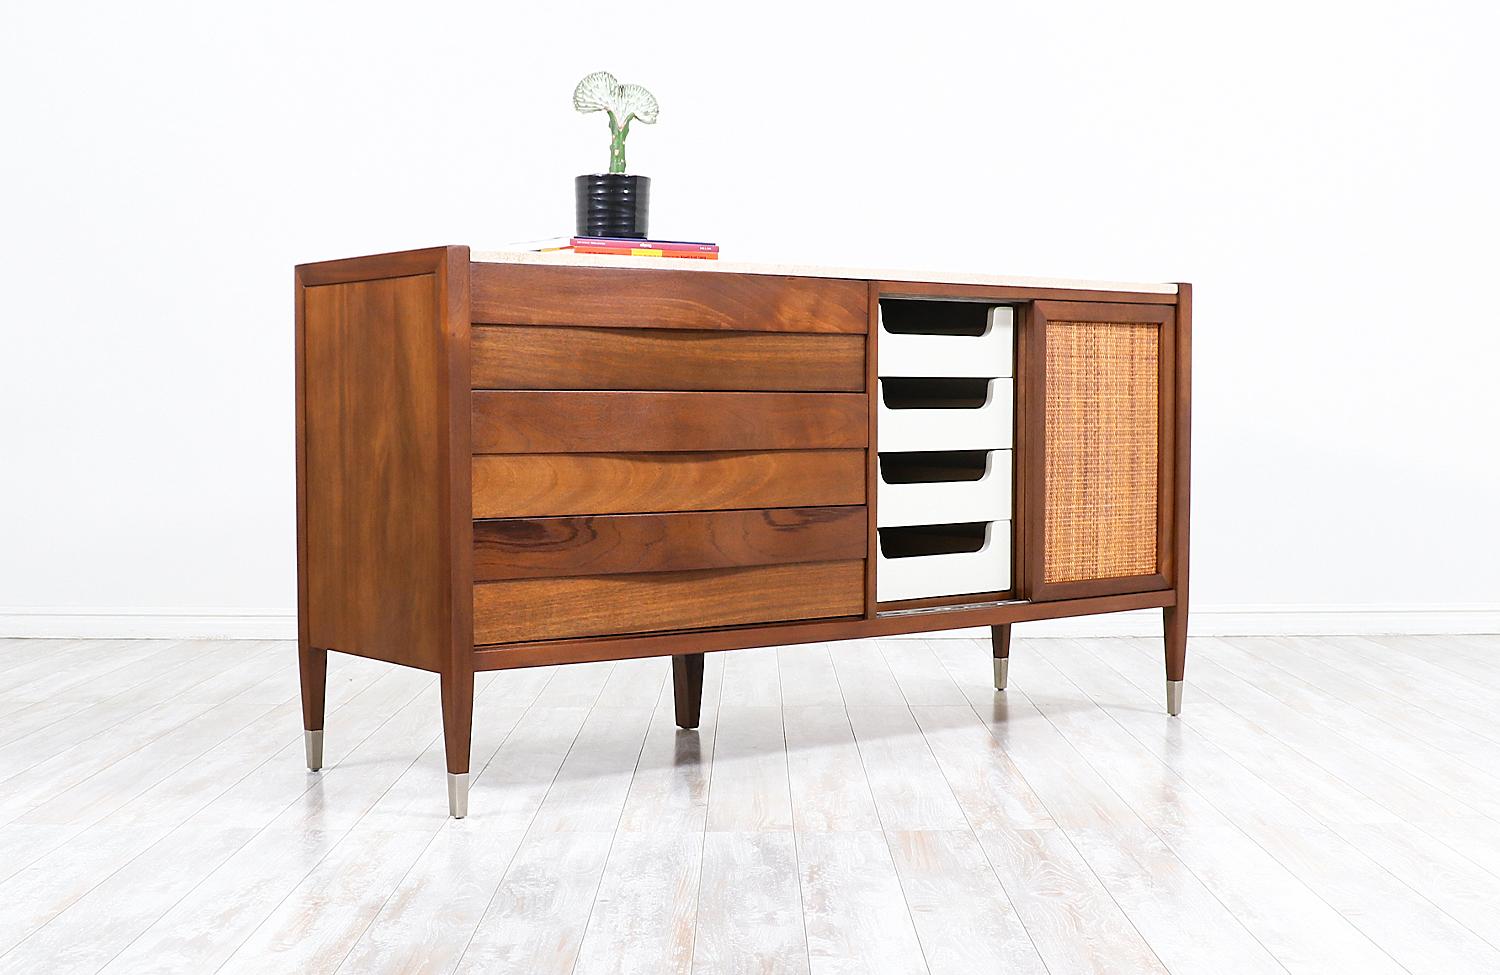 Chrome Mid-Century Modern Credenza with Travertine Top & Cane Doors by American of Mart